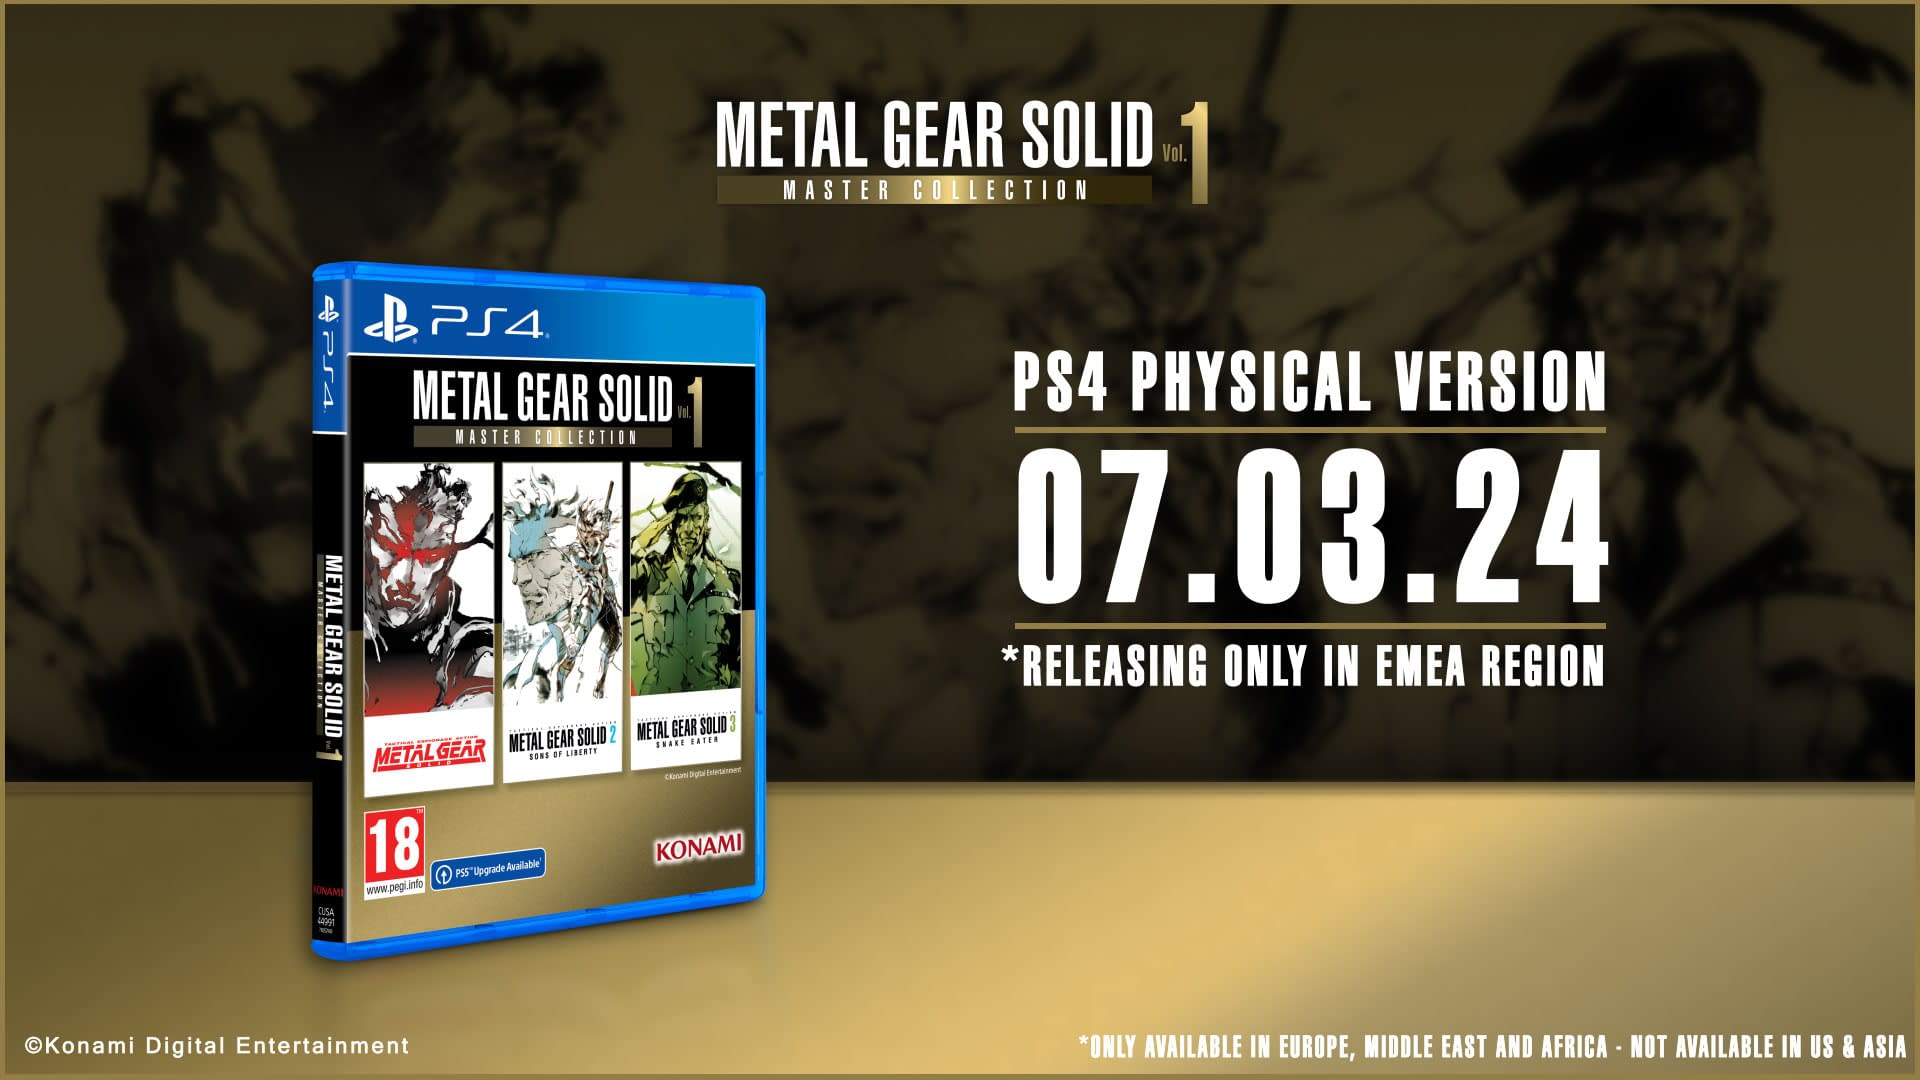 Metal Gear Solid: Master Collection Vol. 1, PS4 Physical Version Launches on March 7